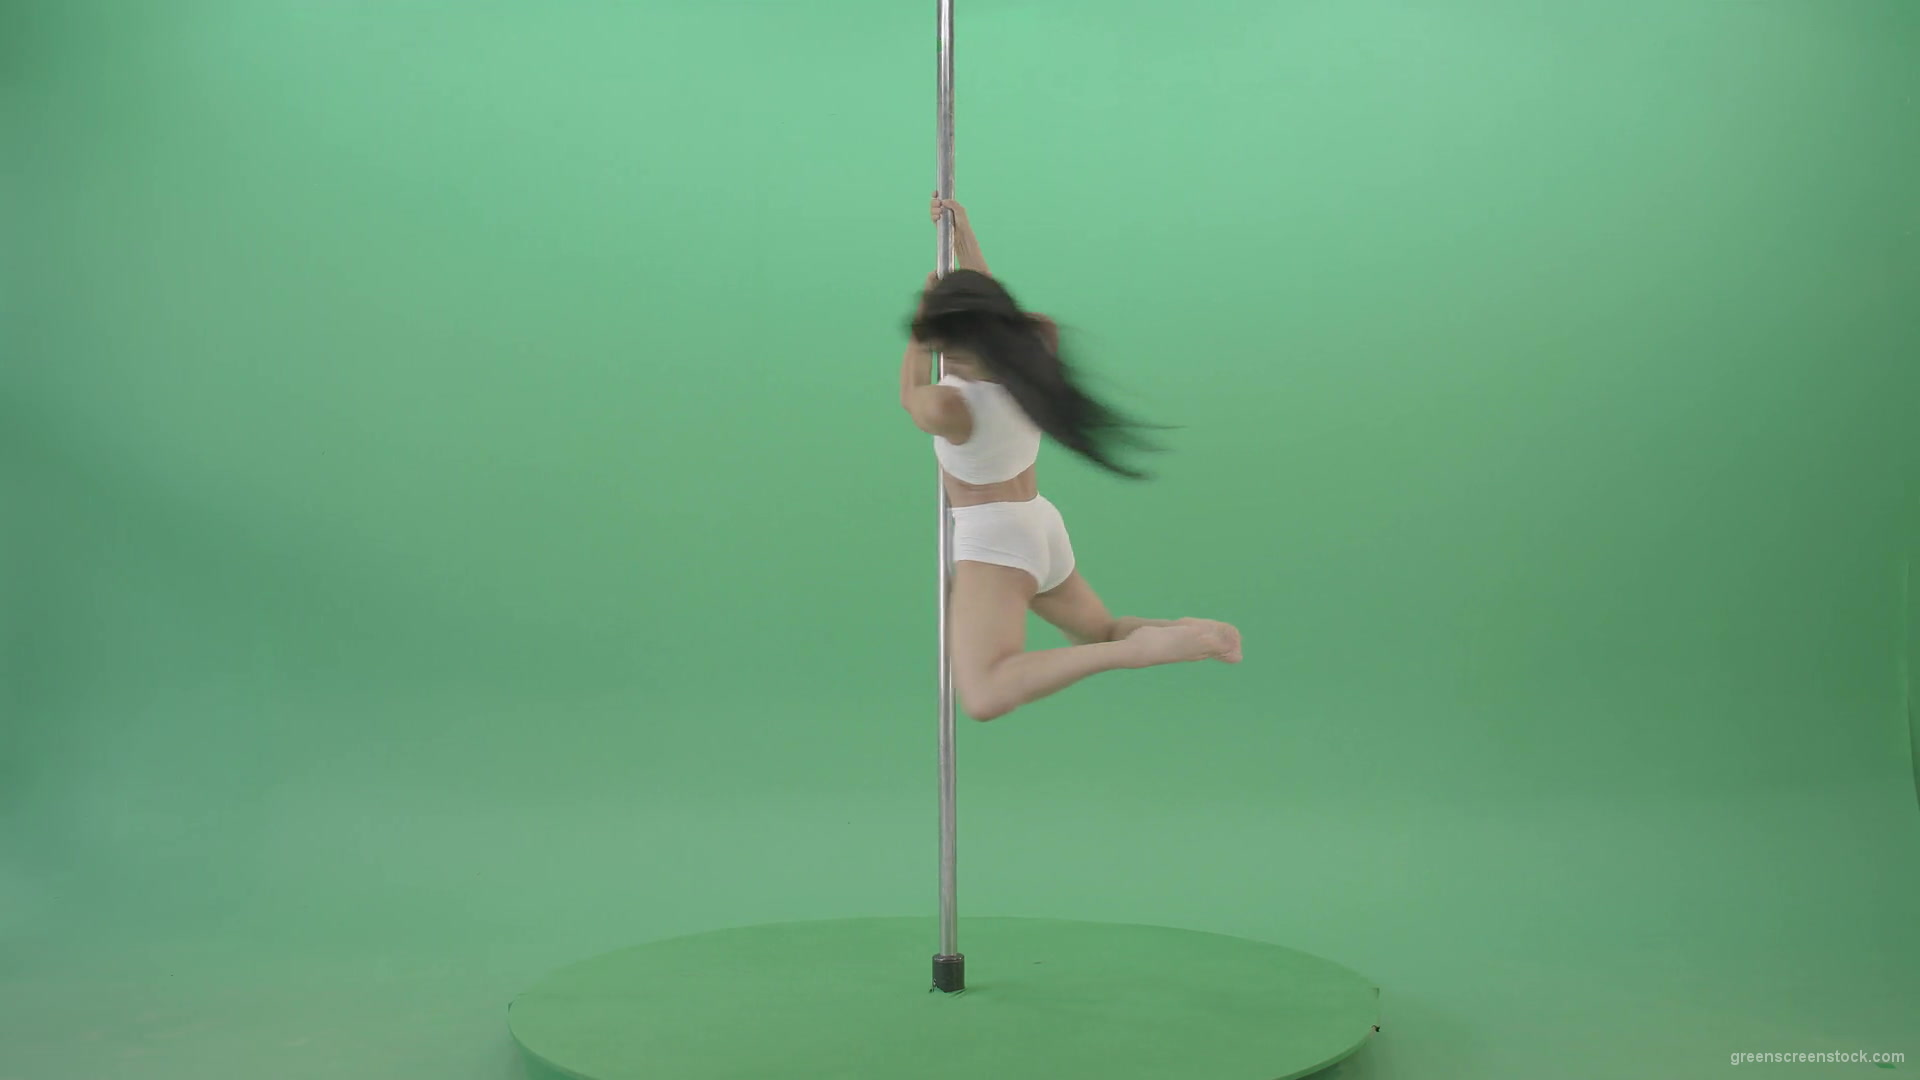 Green-Screen-Woman-spinning-gracefully-on-pole-dance-Video-Footage-1920_004 Green Screen Stock